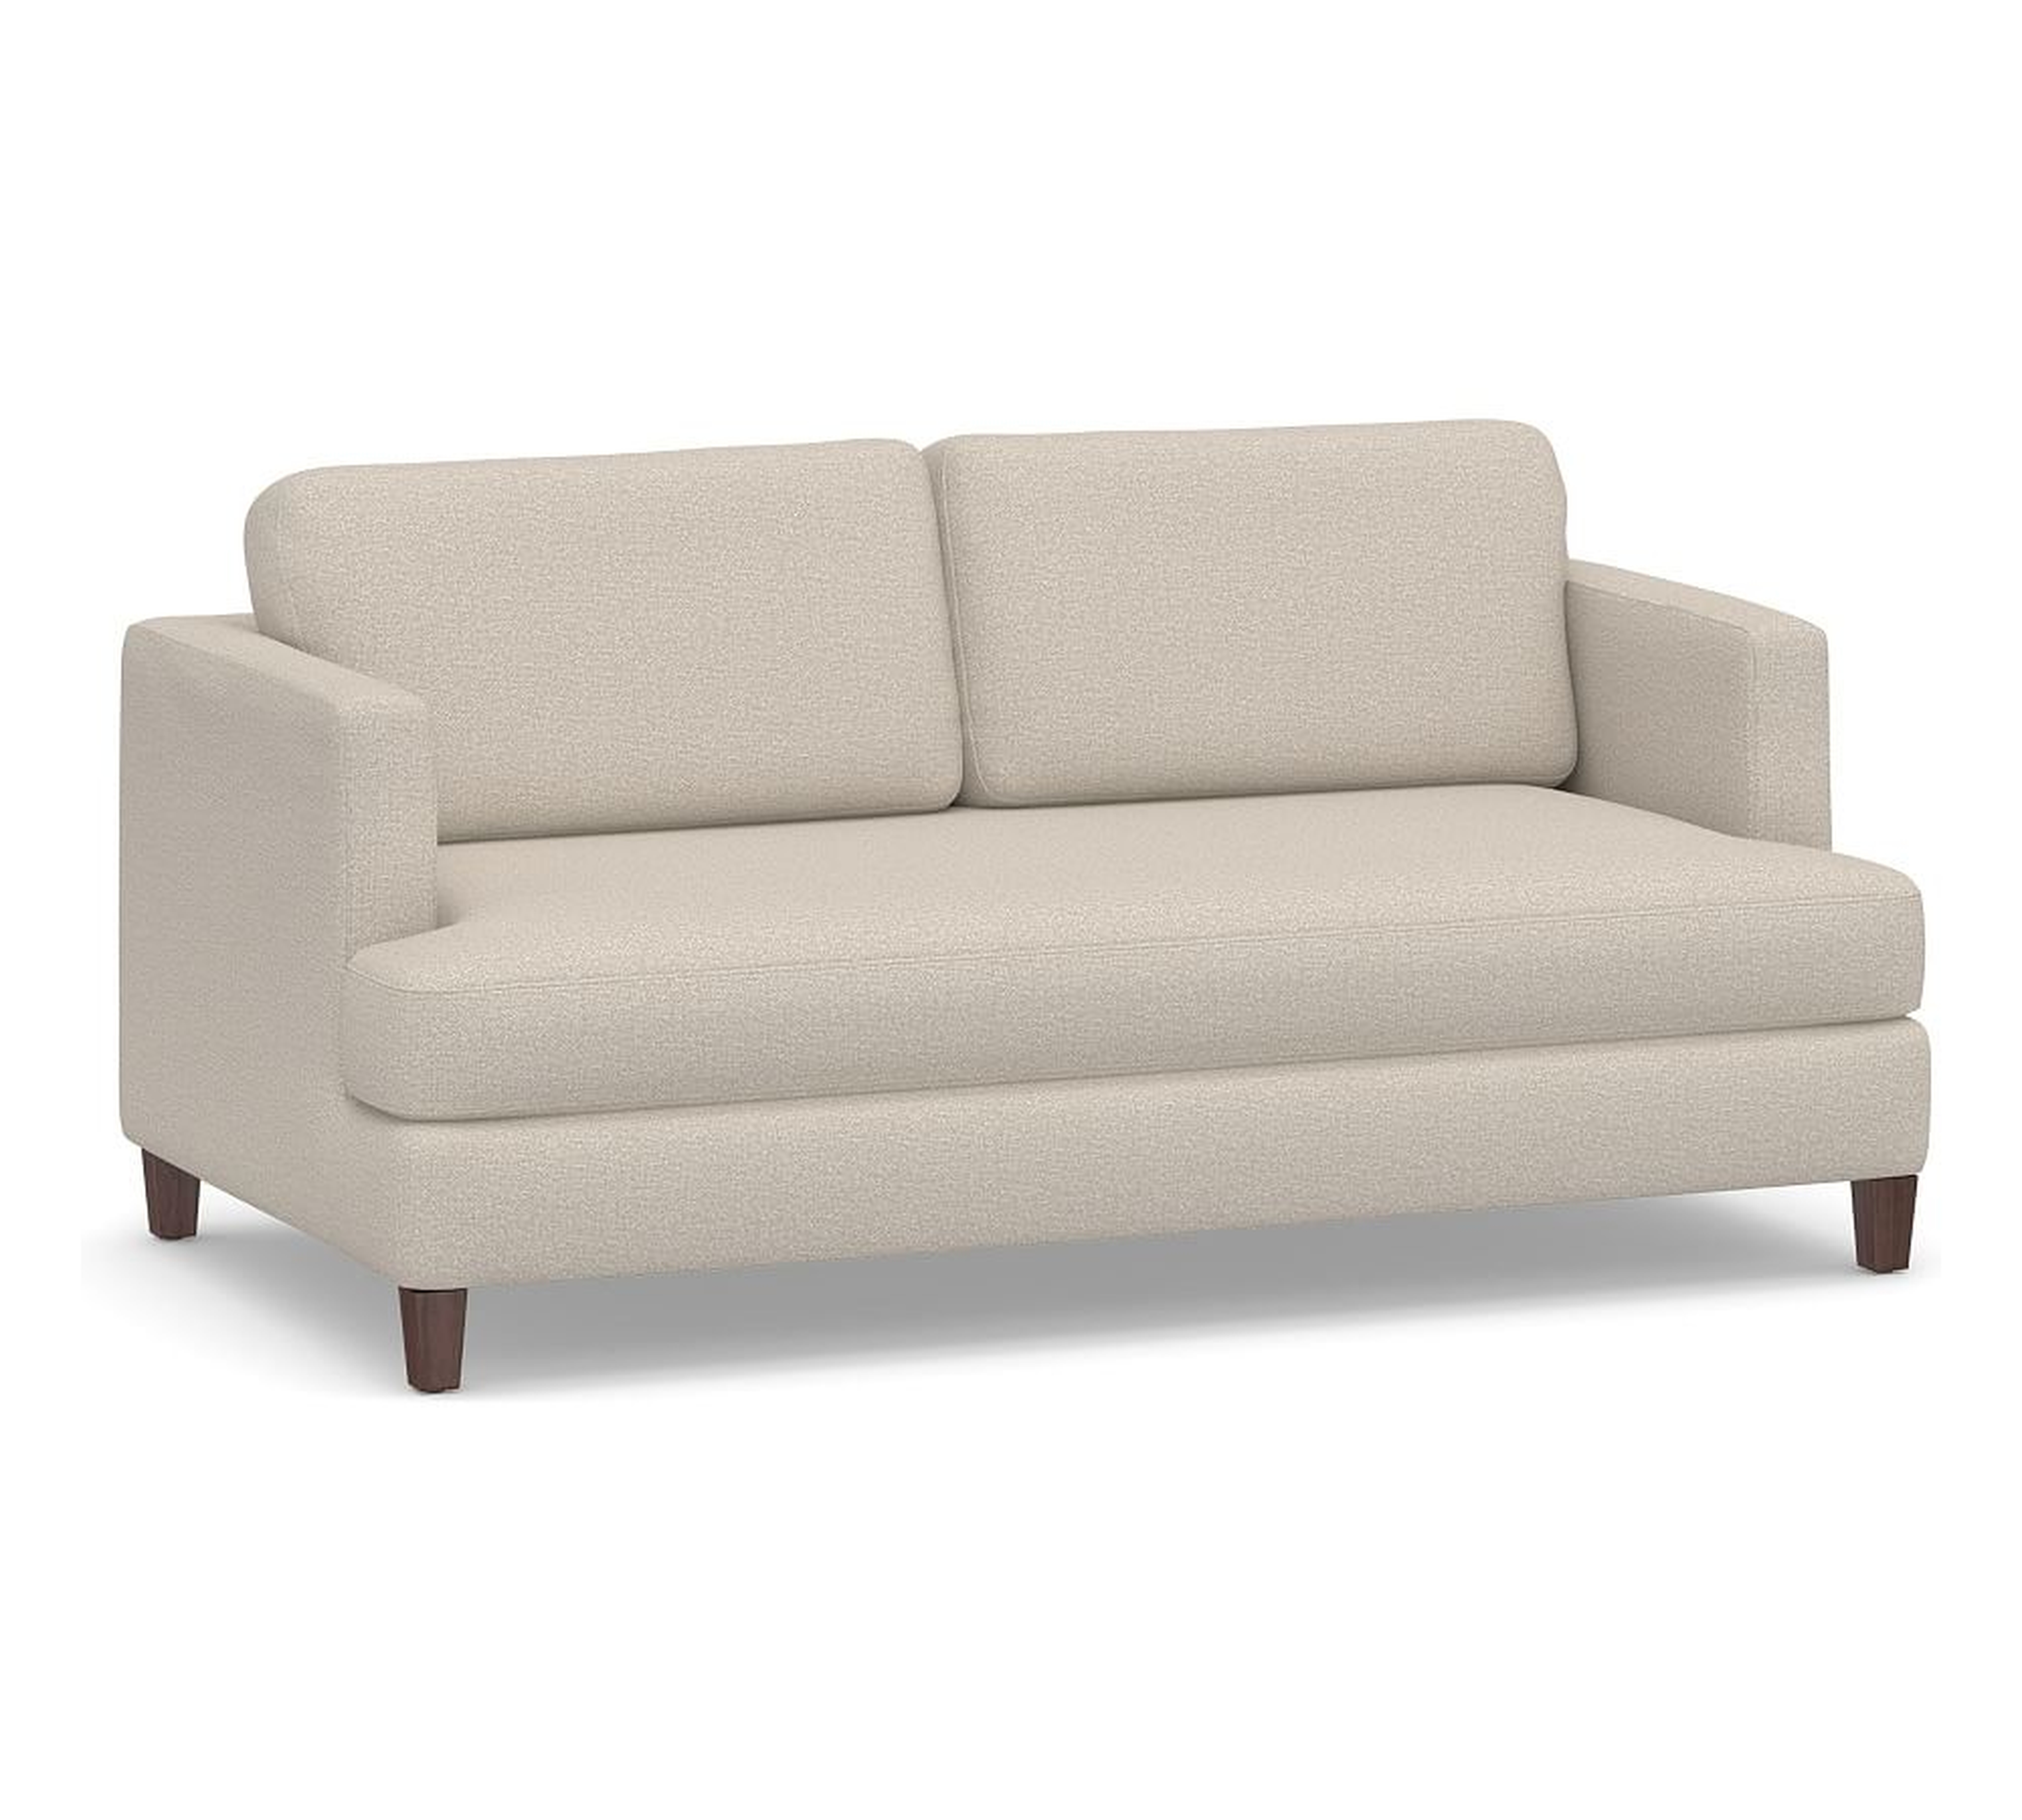 SoMa Ember Upholstered Loveseat 66", Polyester Wrapped Cushions, Performance Chateau Basketweave Oatmeal - Pottery Barn